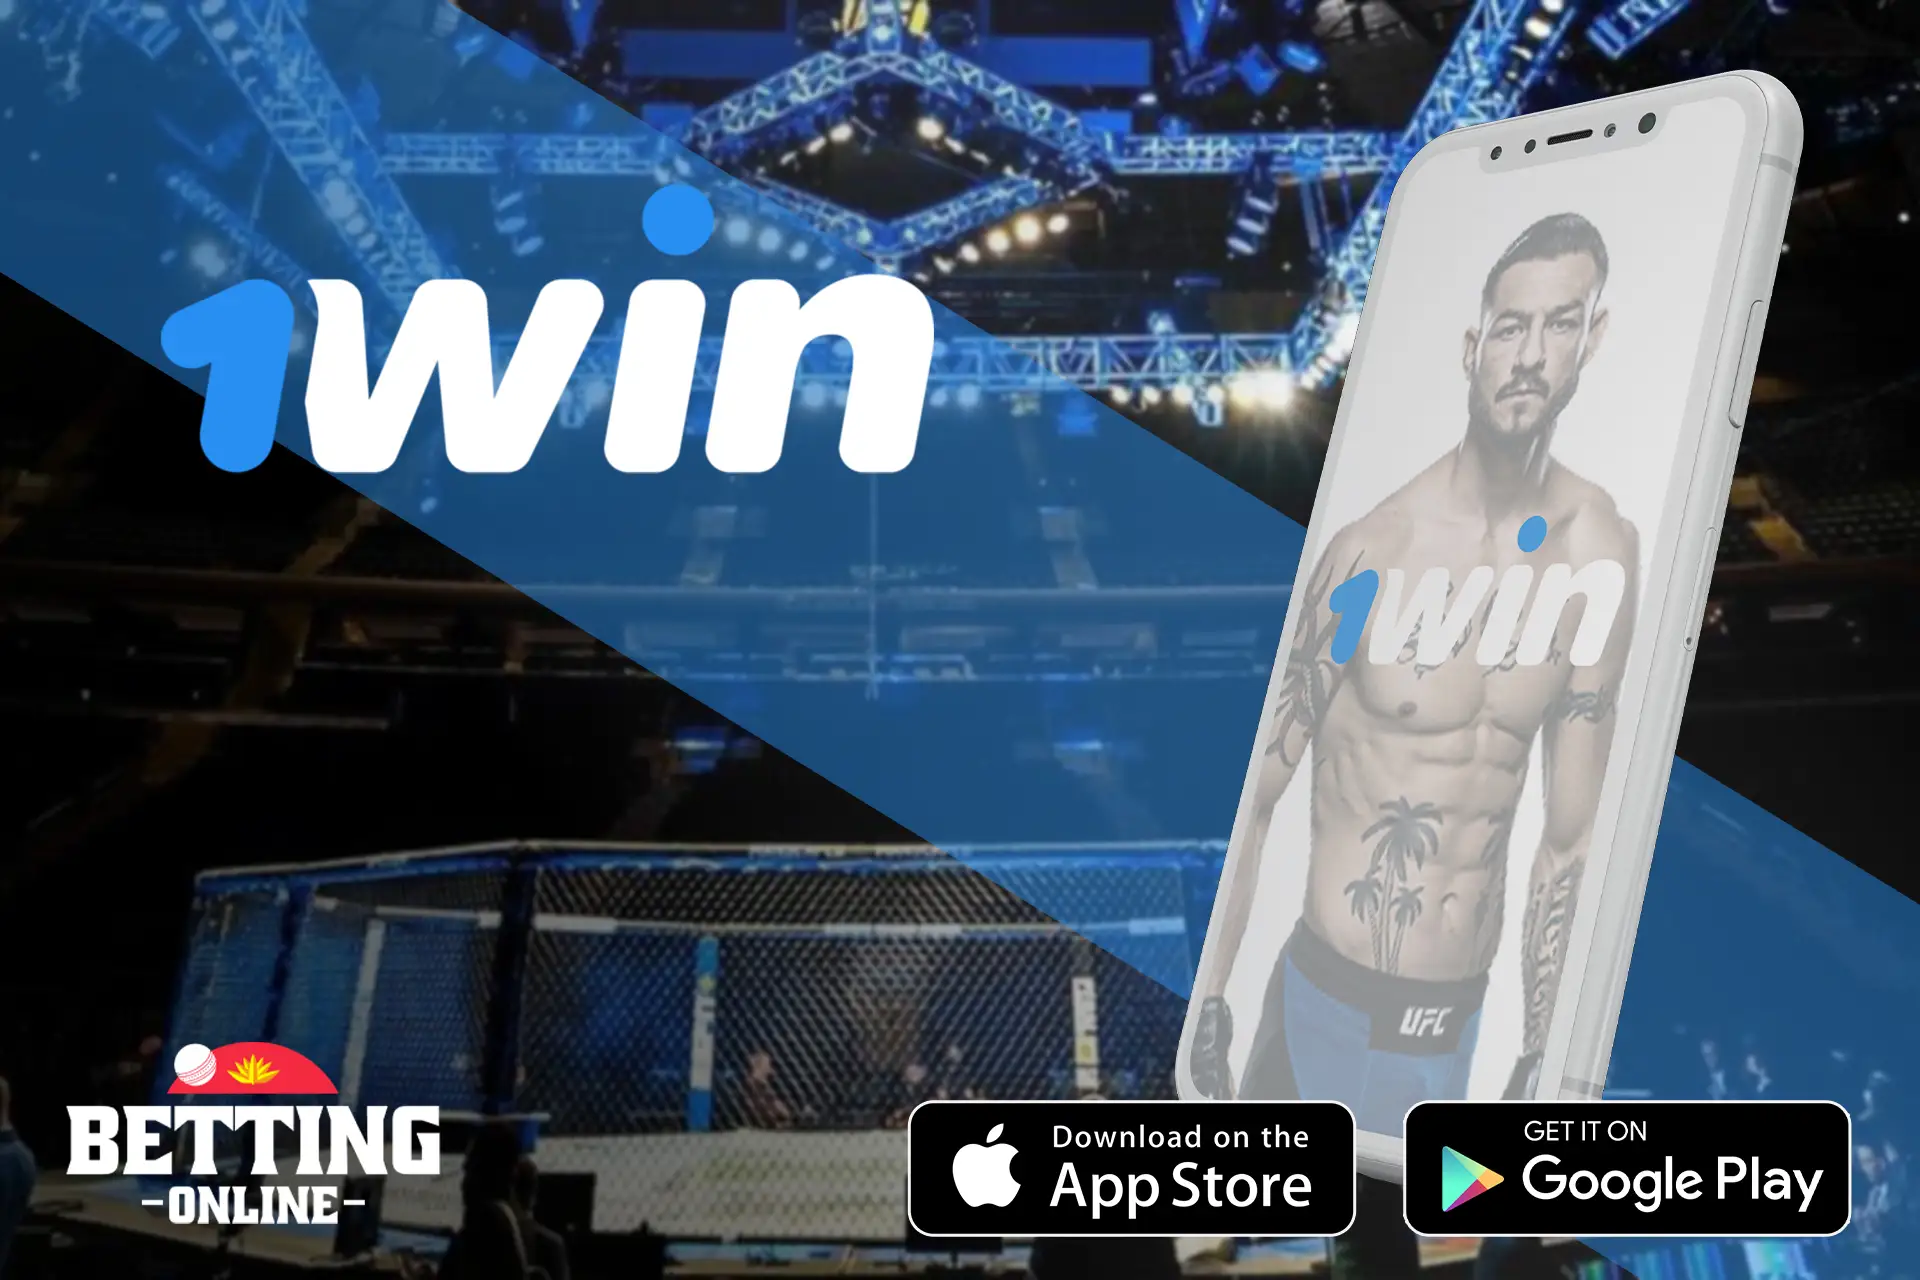 Thousands of 1win customers are betting on UFC.